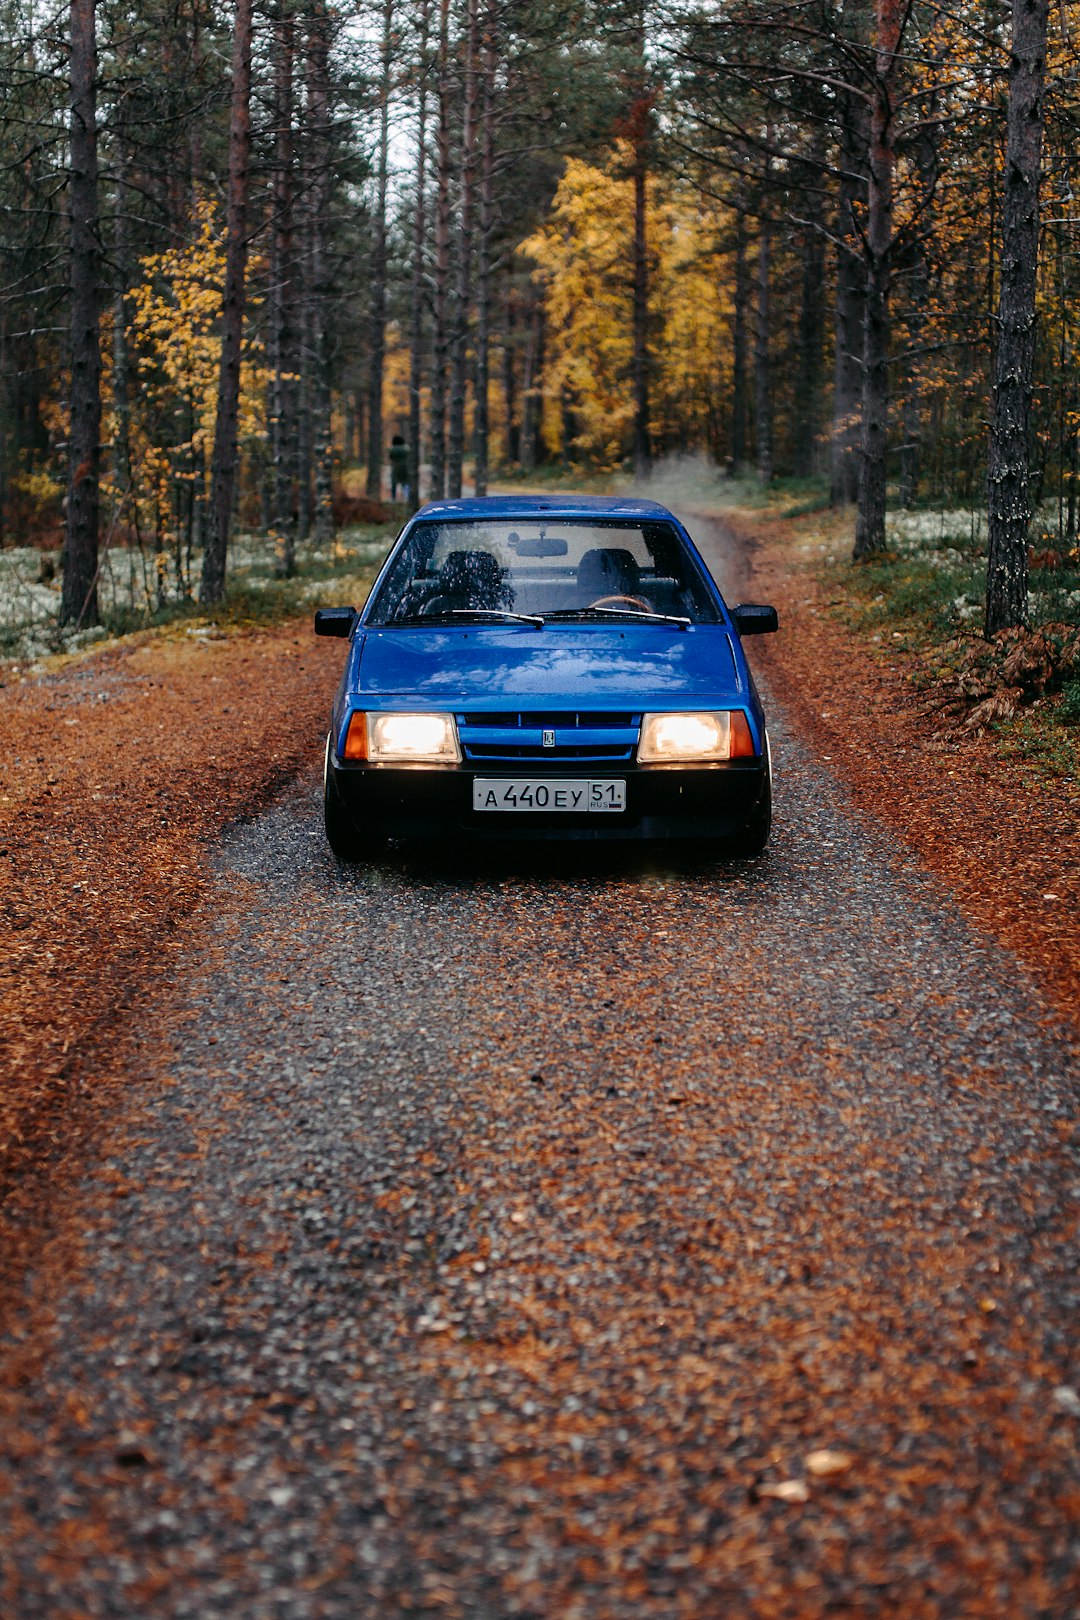 blue car on dirt road in between trees during daytime